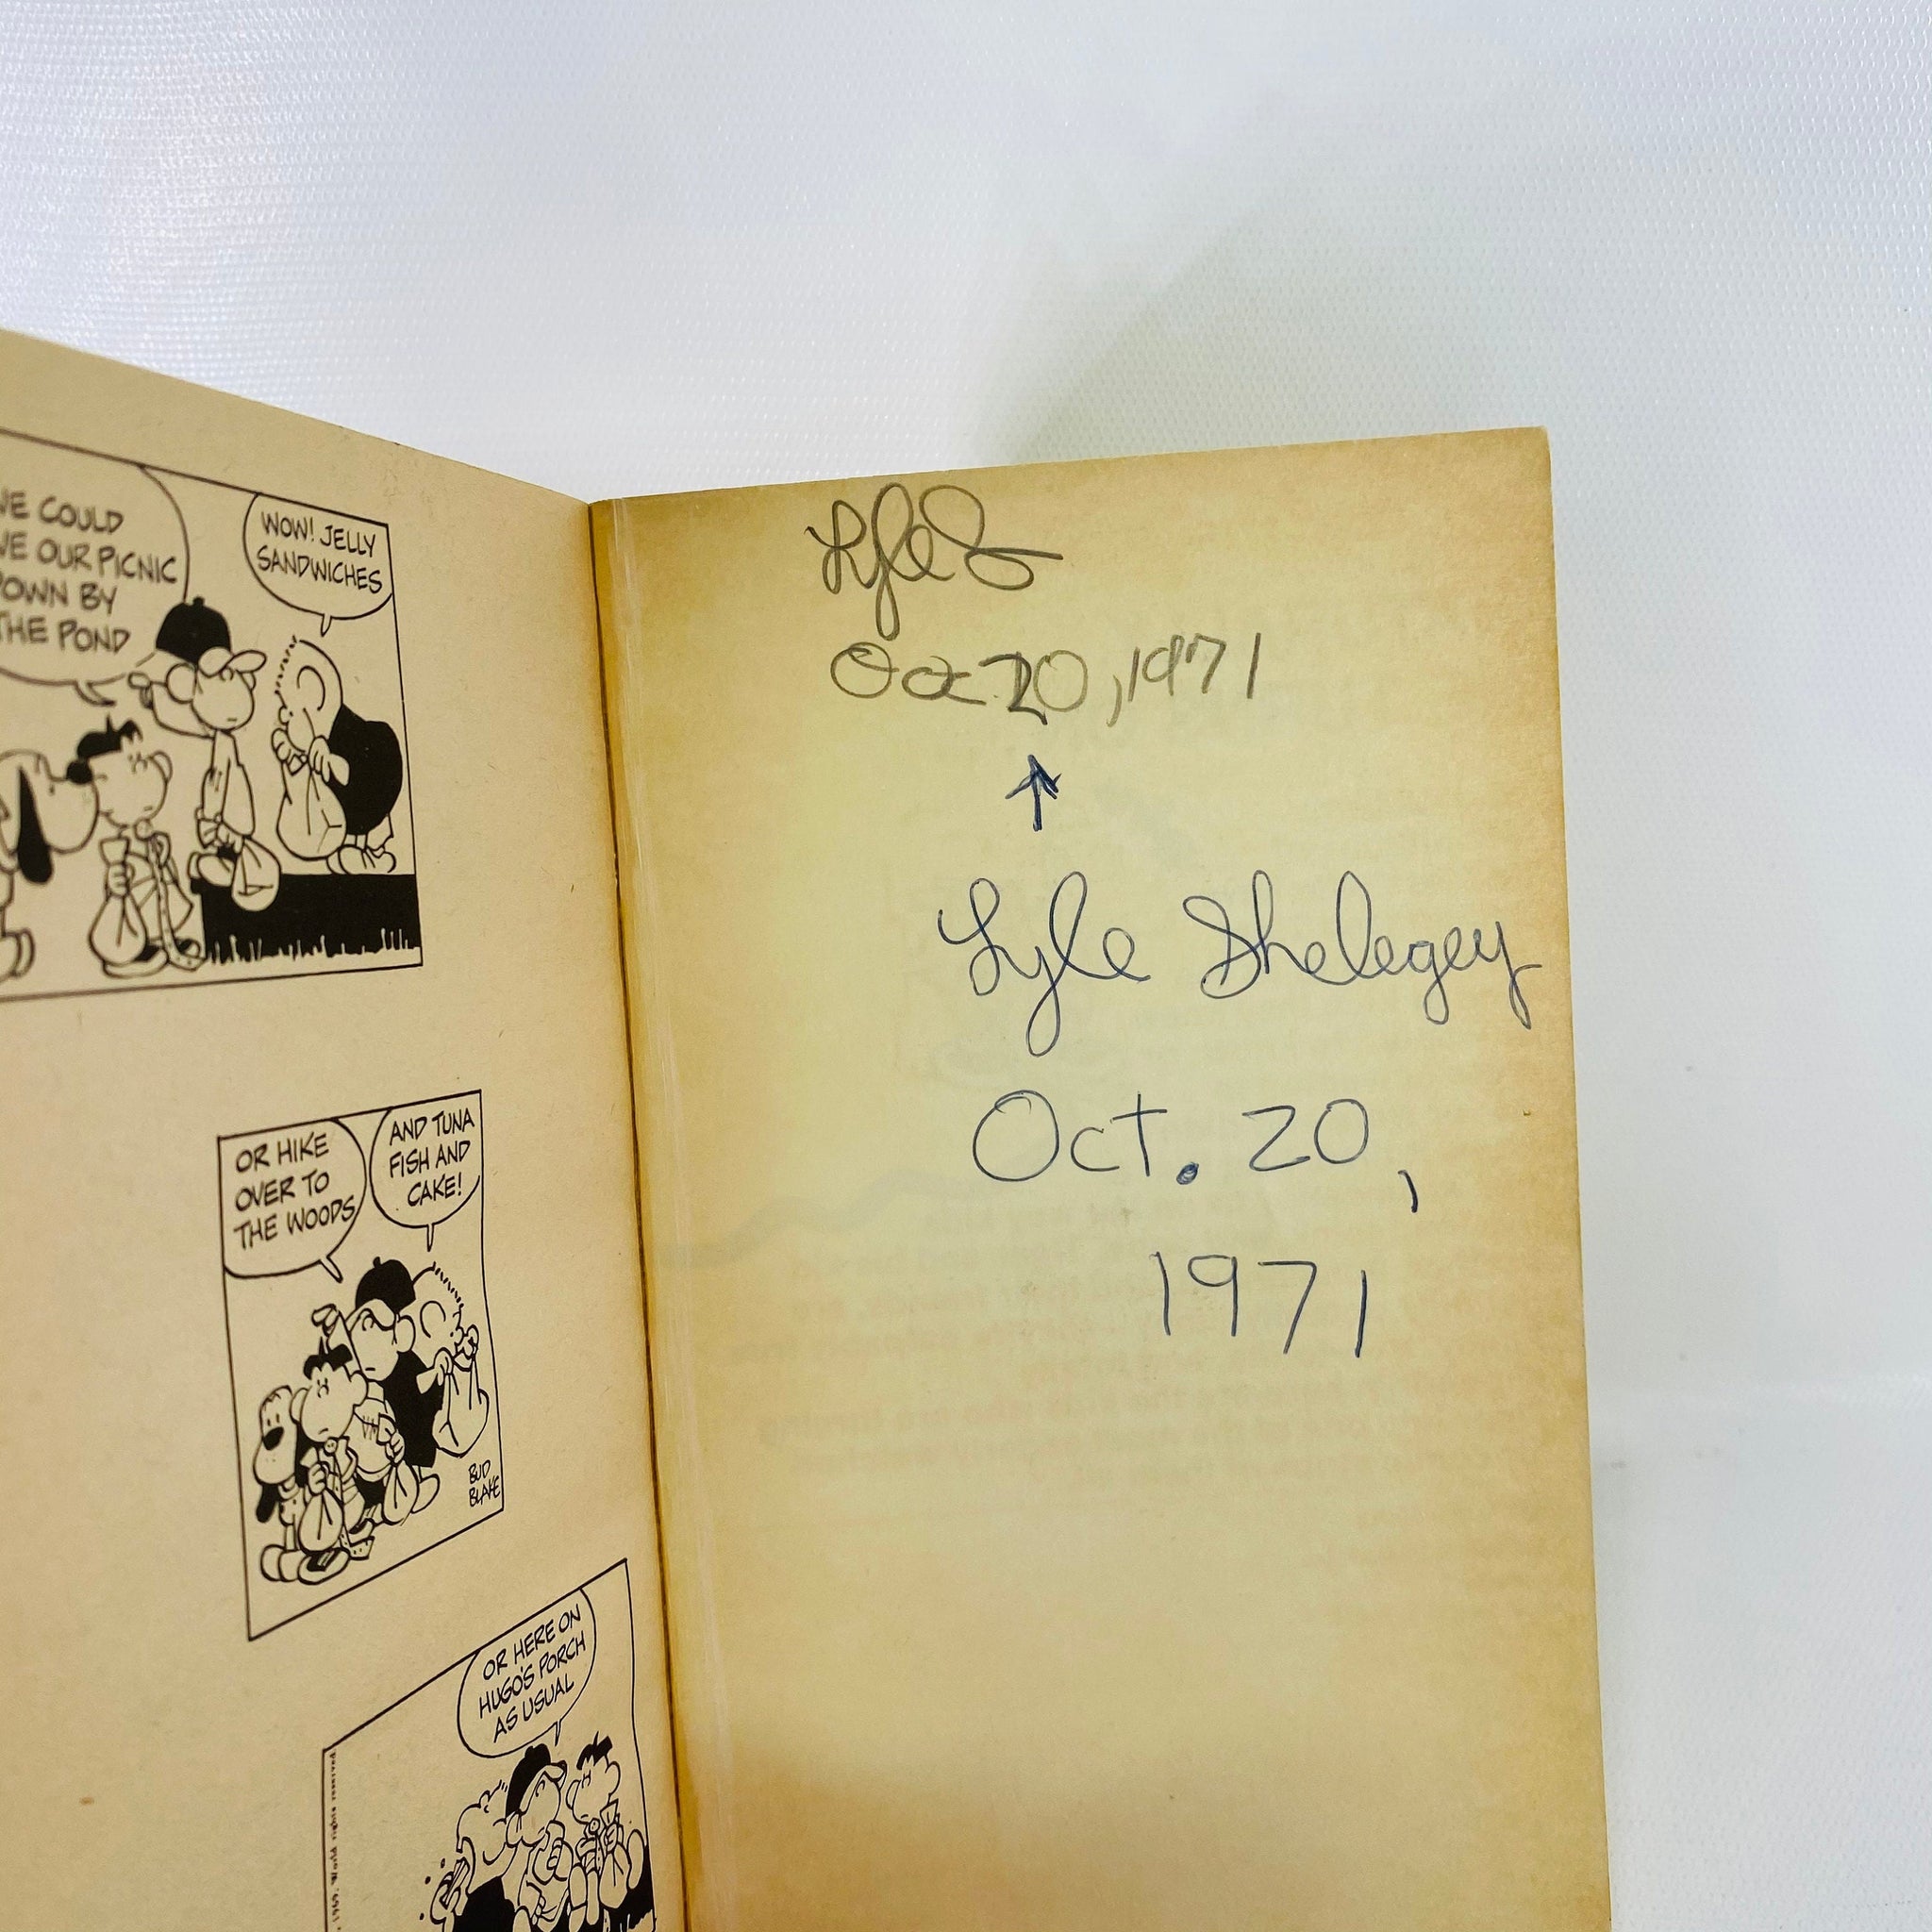 Peanuts: The Gang's All Here!  Book by Charles M. Schulz